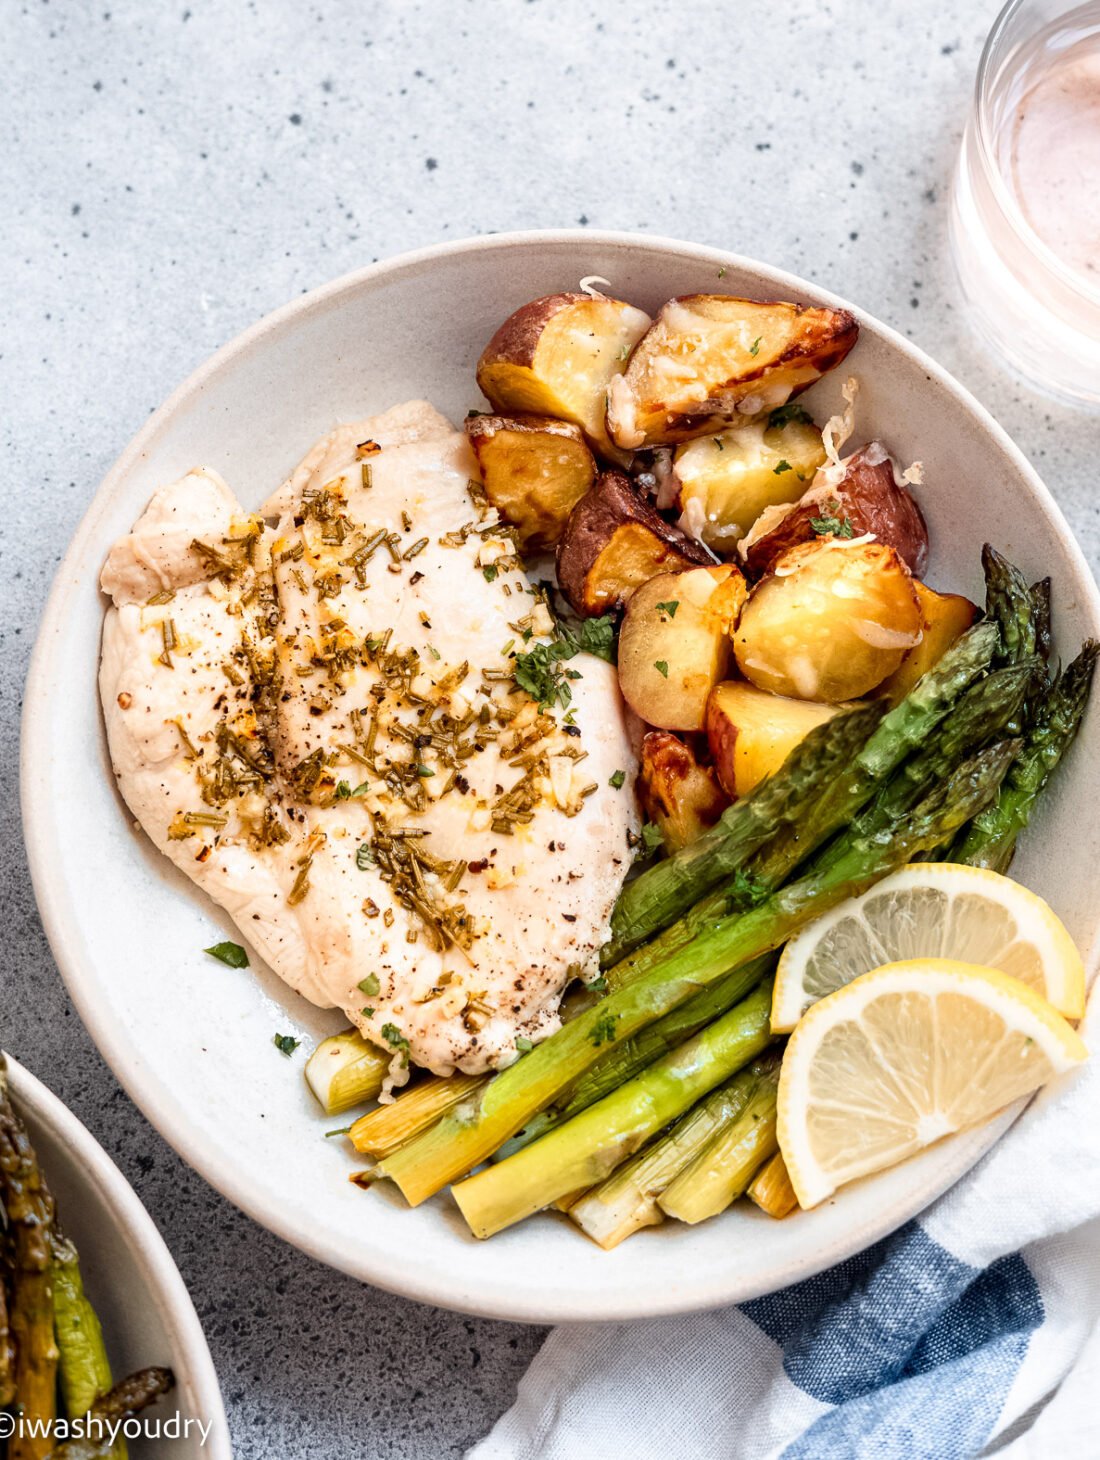 Baked Lemon Garlic Chicken with potatoes, asparagus, and lemon slices on white plate.